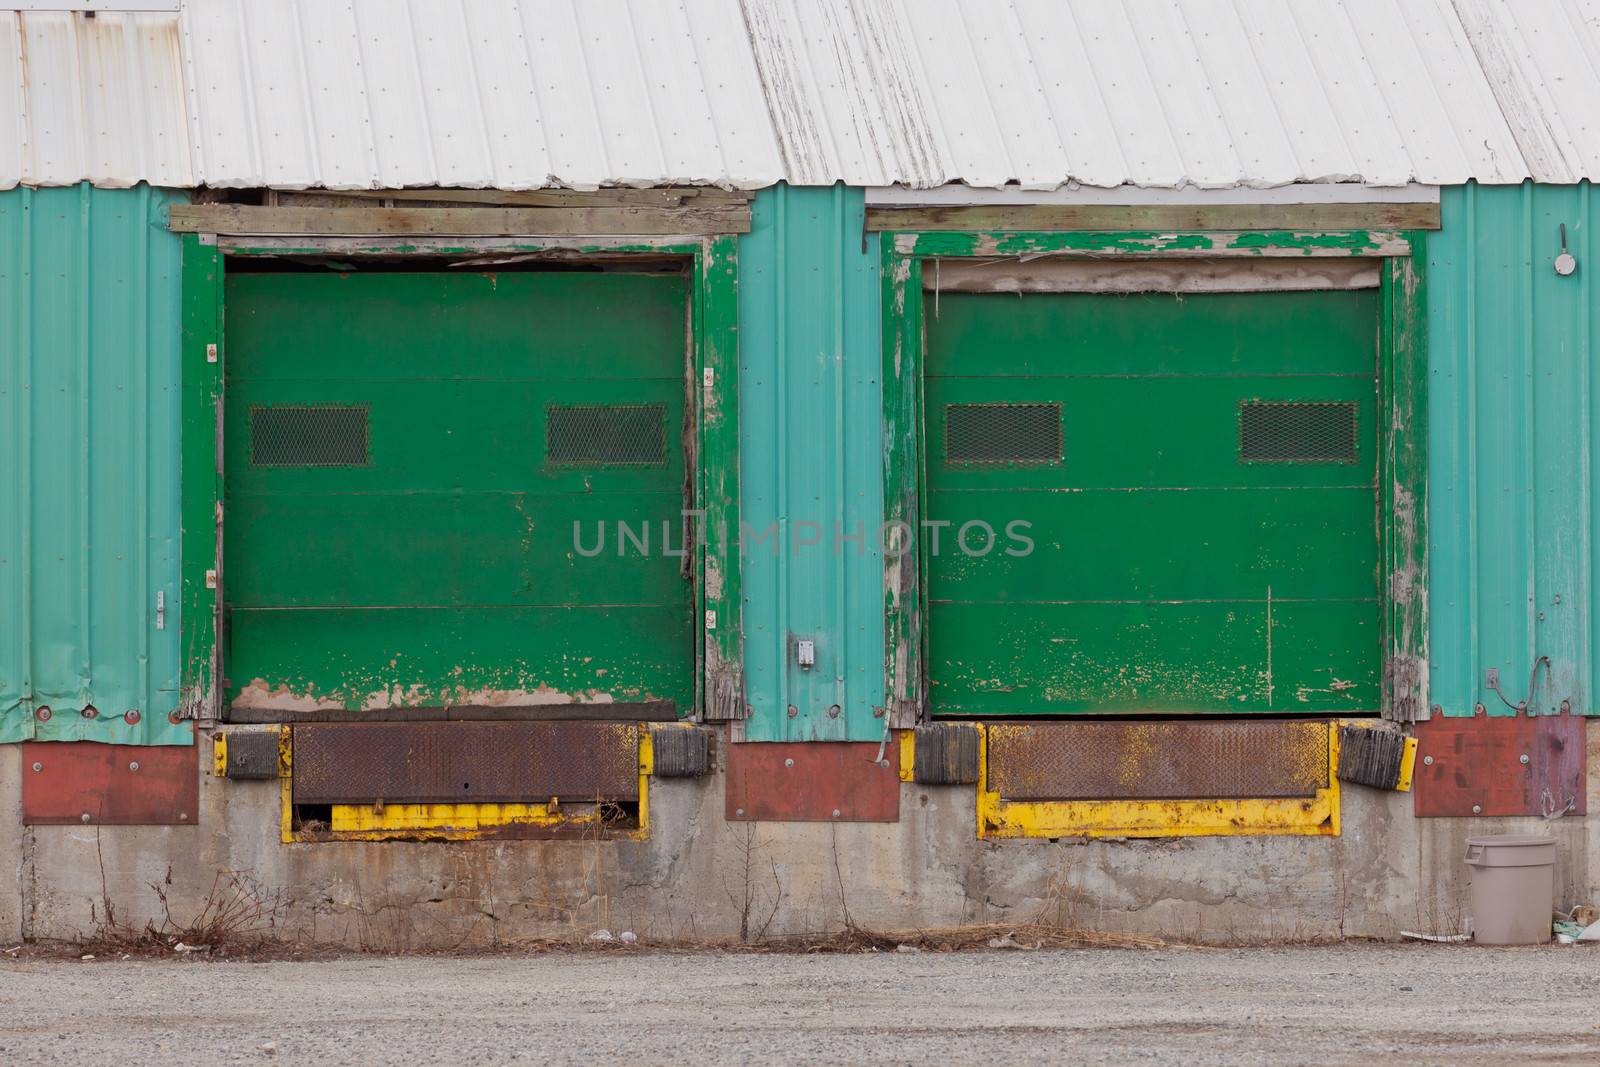 Two green painted shuttered doors for loading in a prefabricated metal clad warehouse building